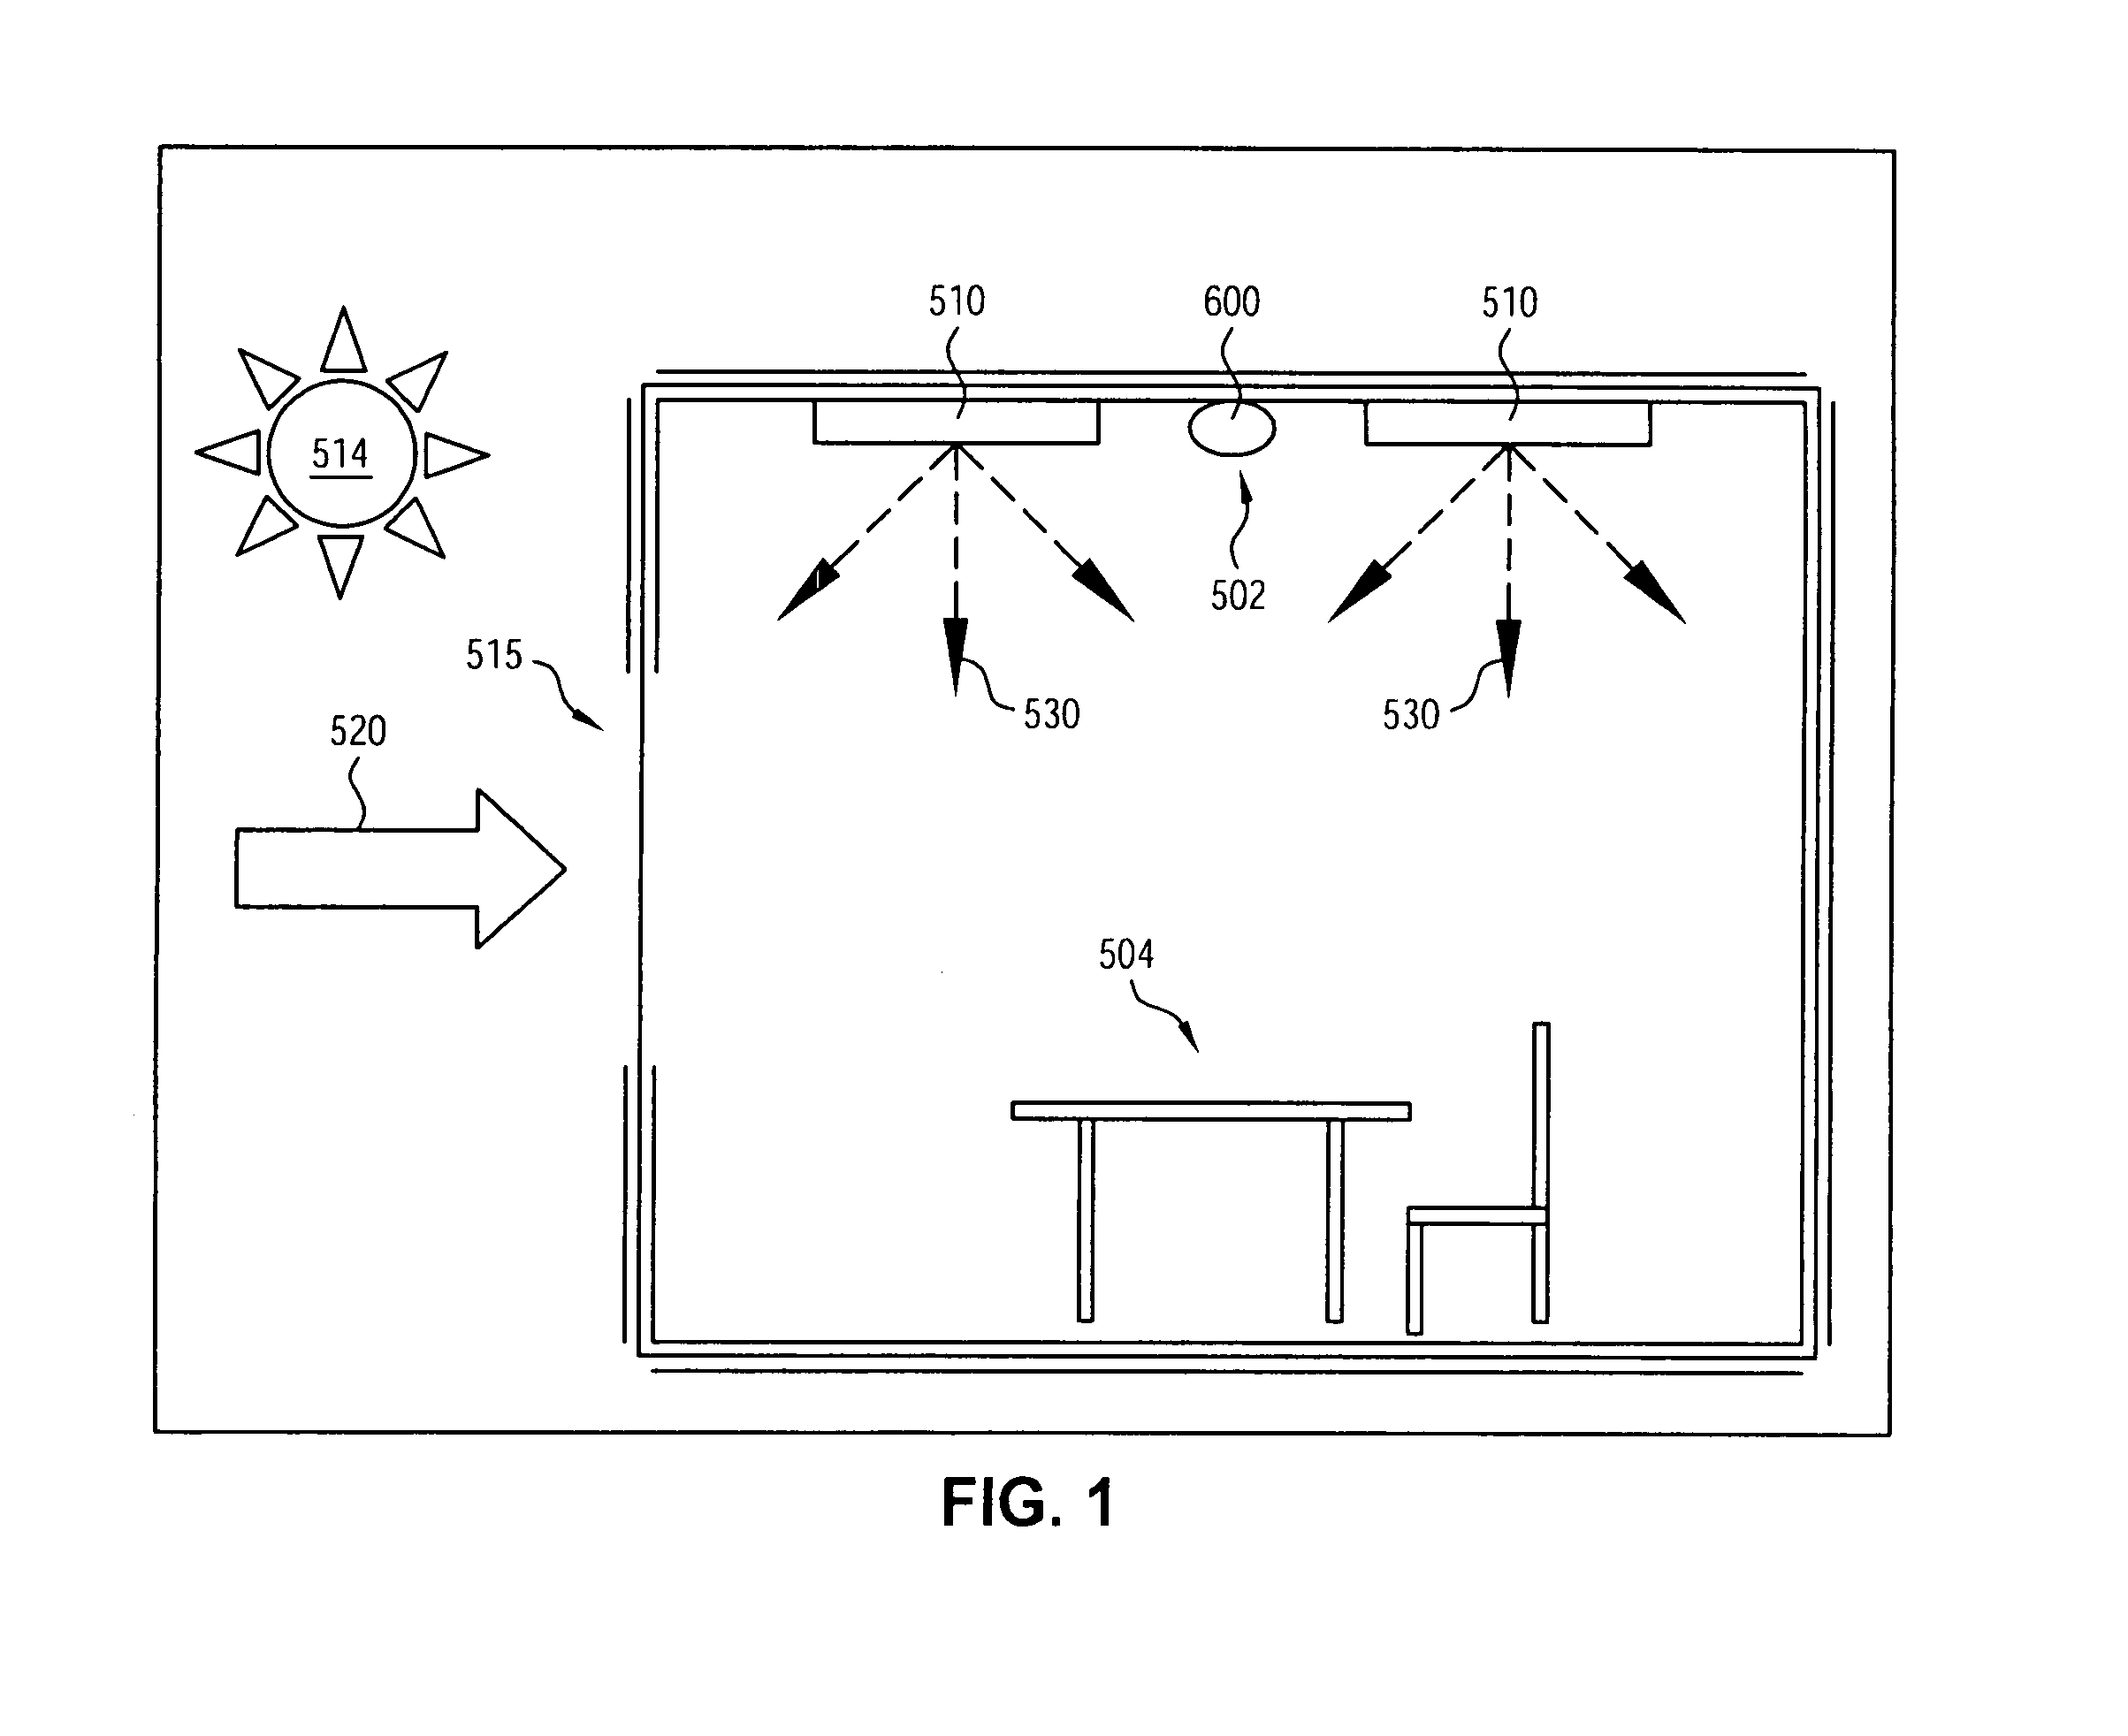 Self-commissioning daylight switching system